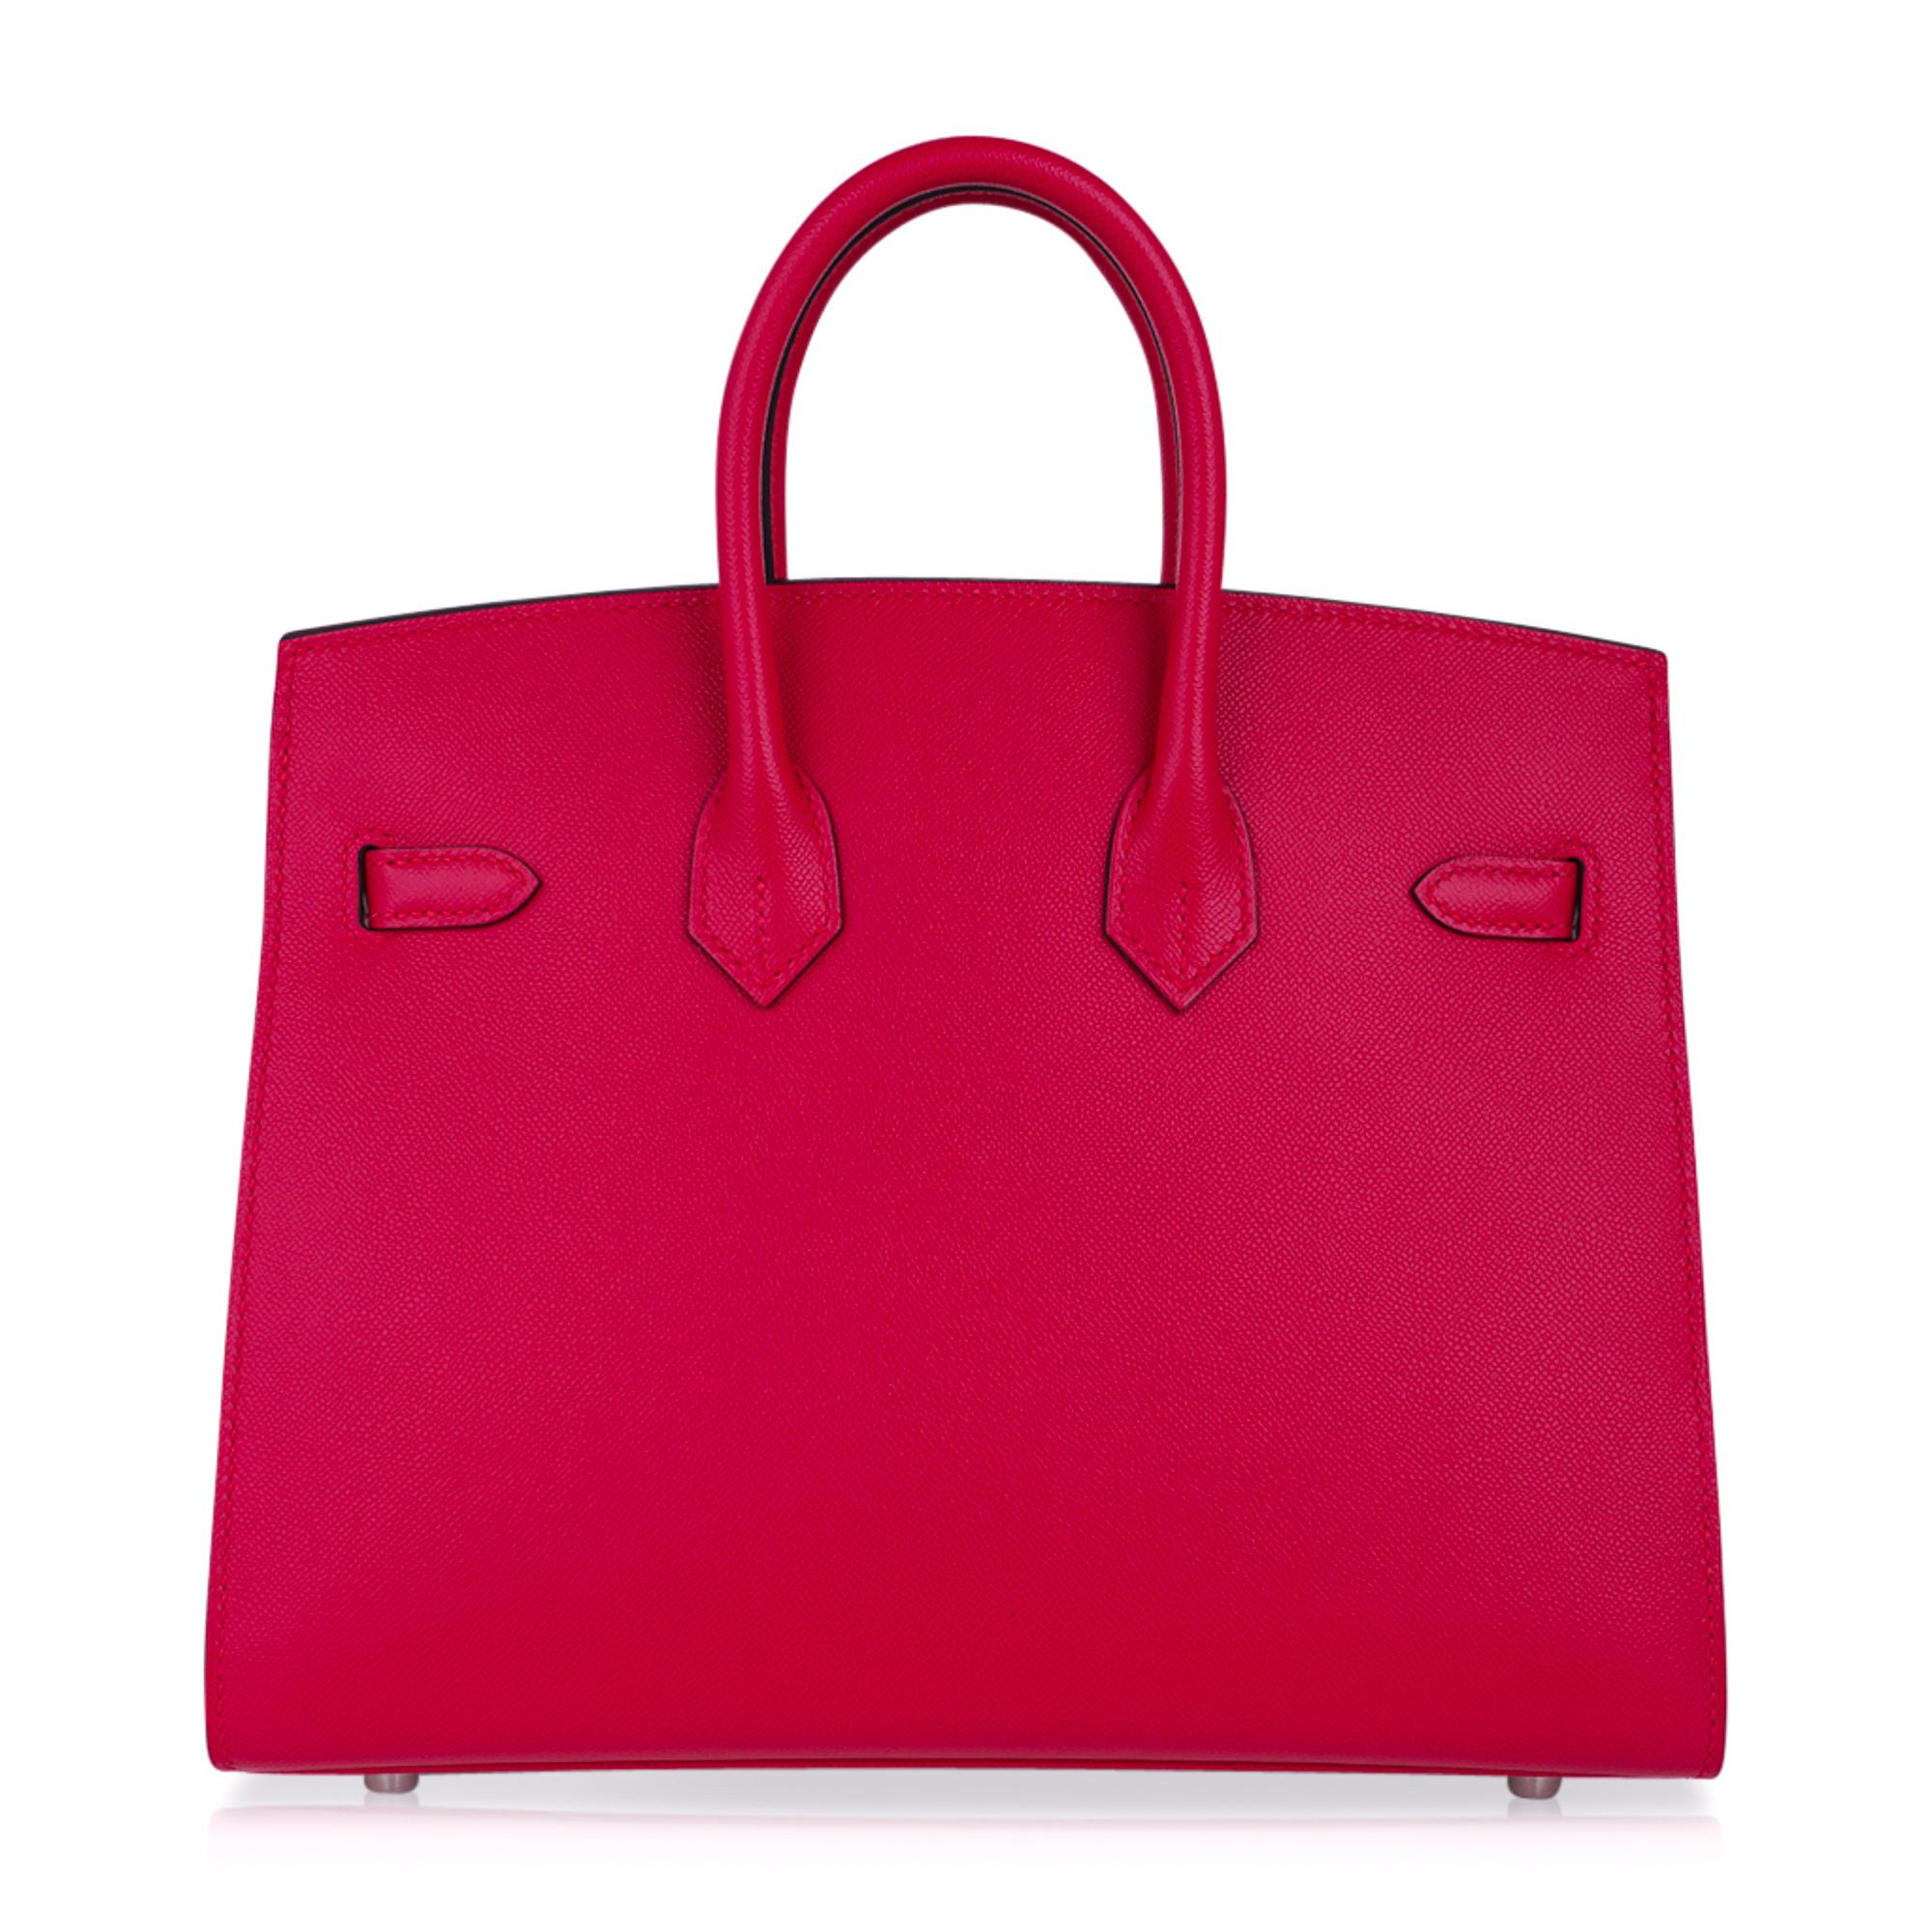 Hermes Birkin Sellier 25 Bag Framboise Veau Madame Palladium Hardware Limited Ed In New Condition For Sale In Miami, FL